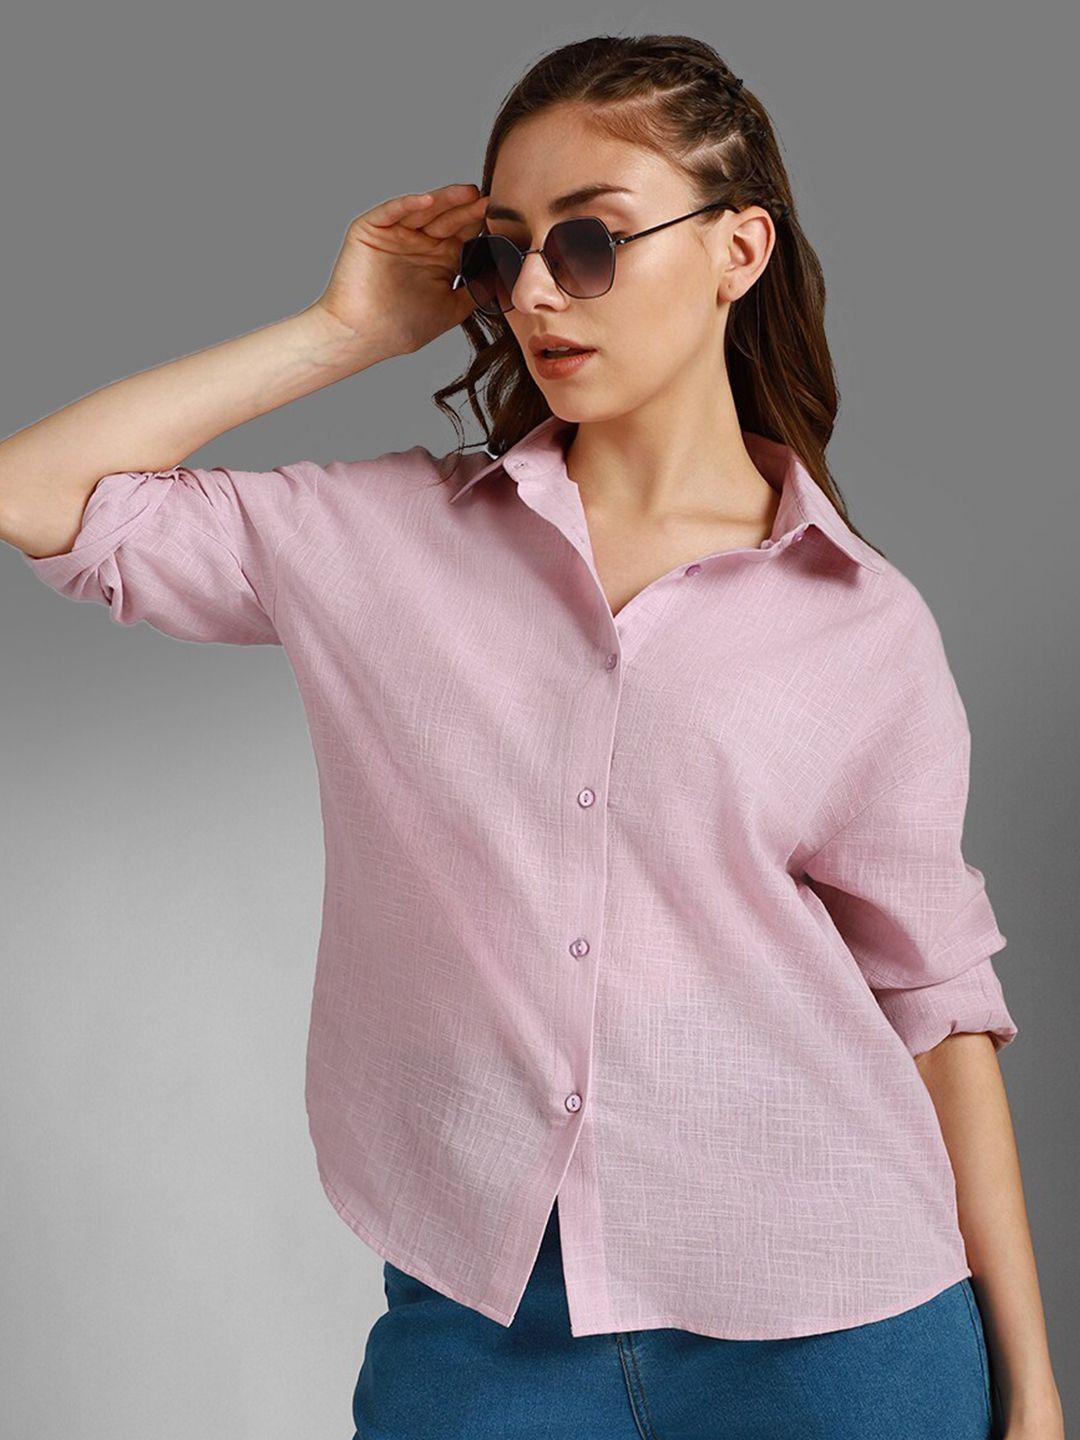 high-star-classic-boxy-spread-collar-long-sleeves-cotton-casual-shirt